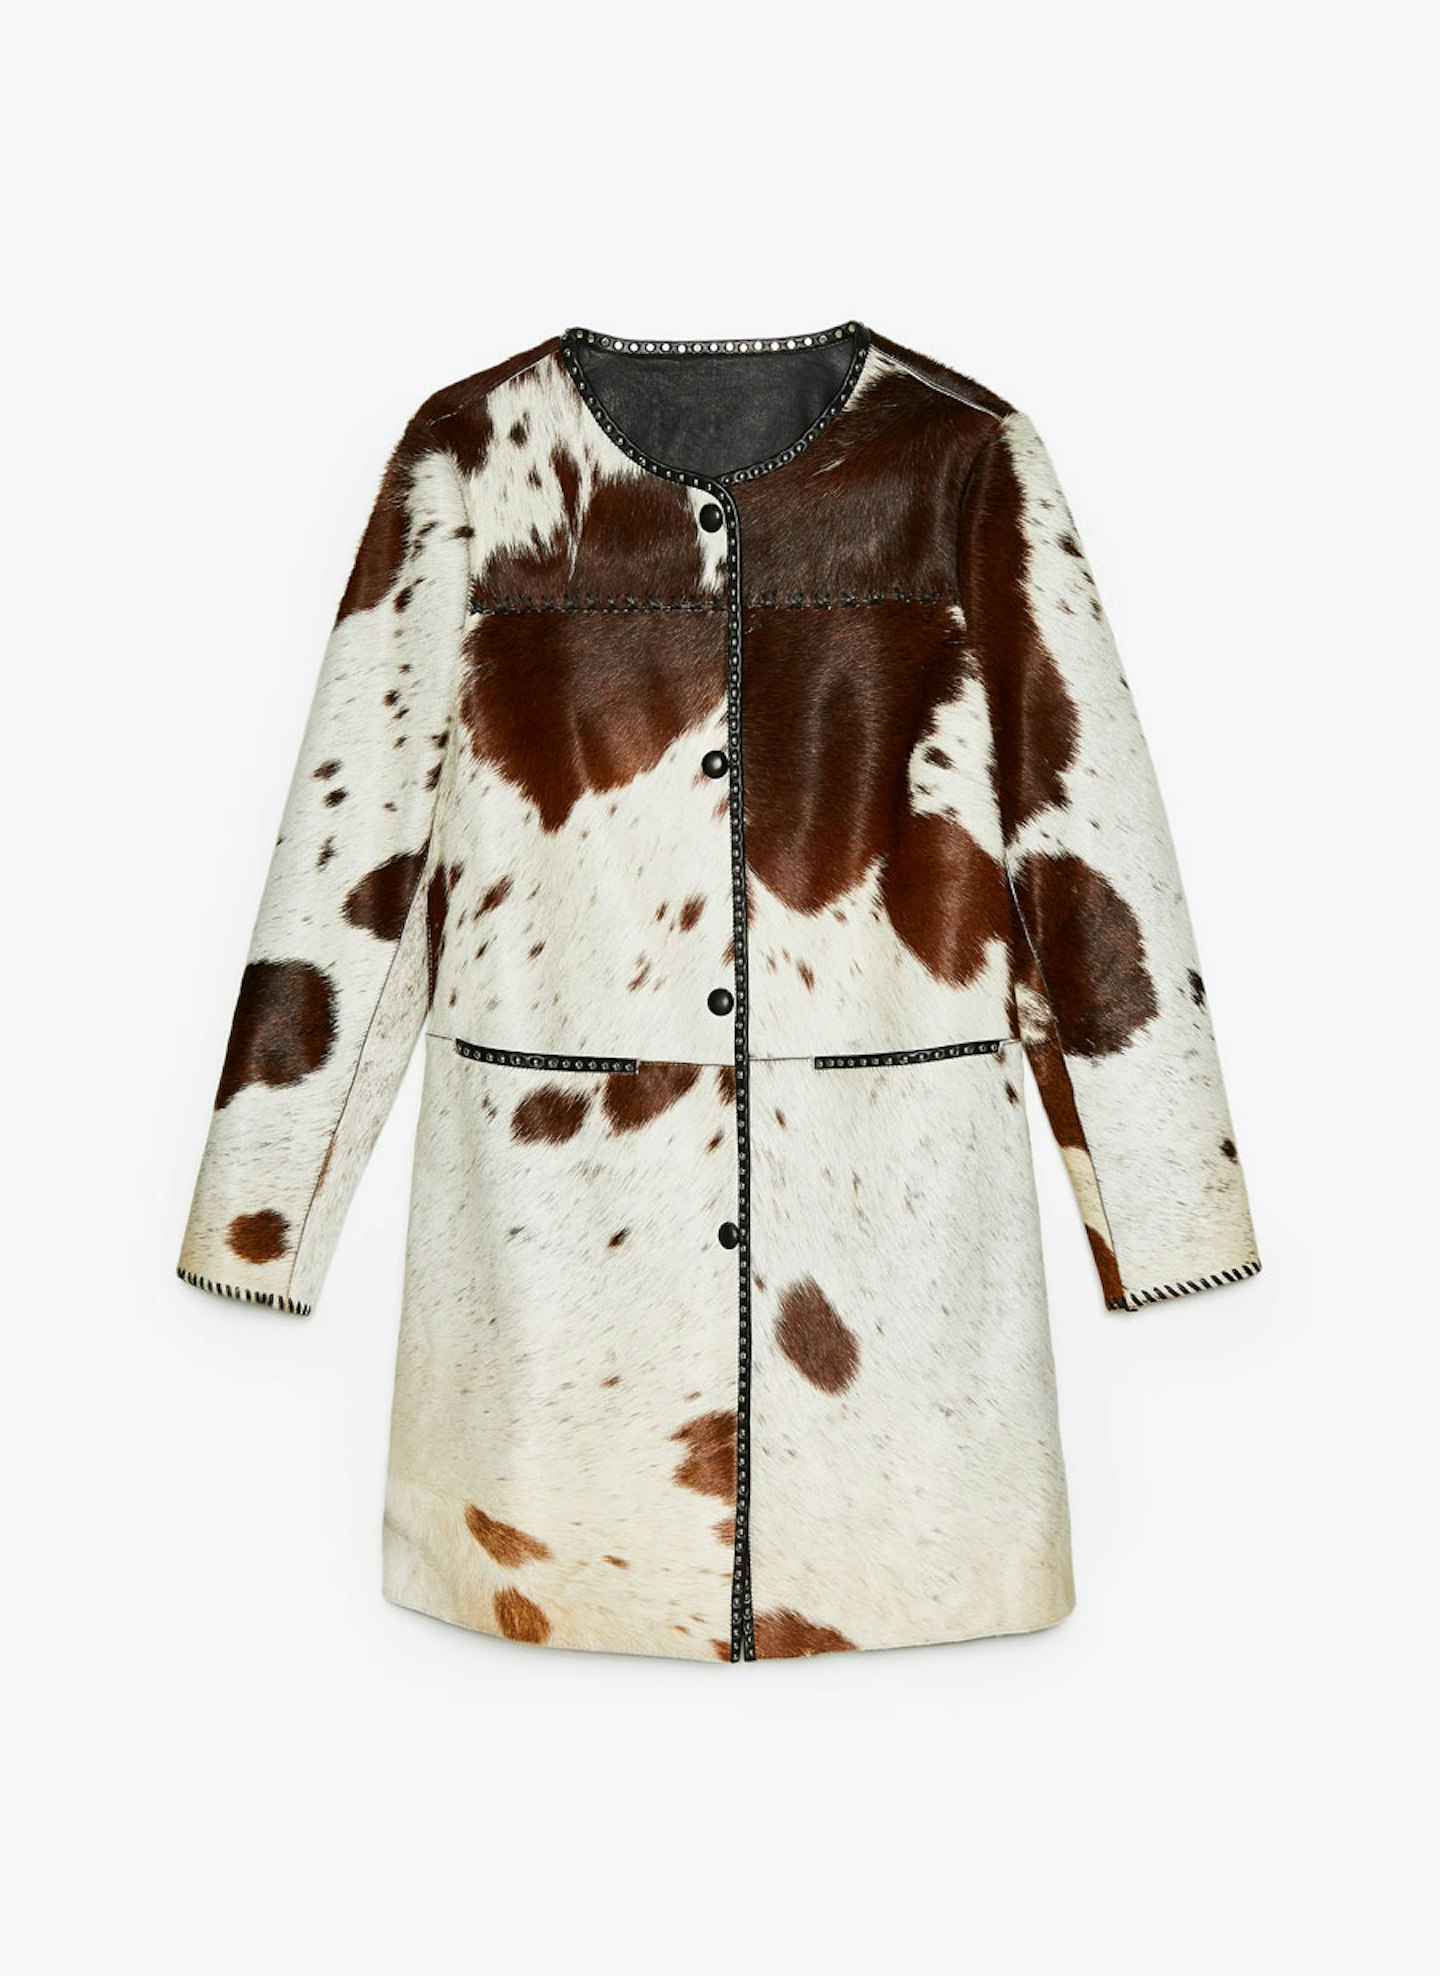 Uterque, Two-Toned Cow Jacket, £400